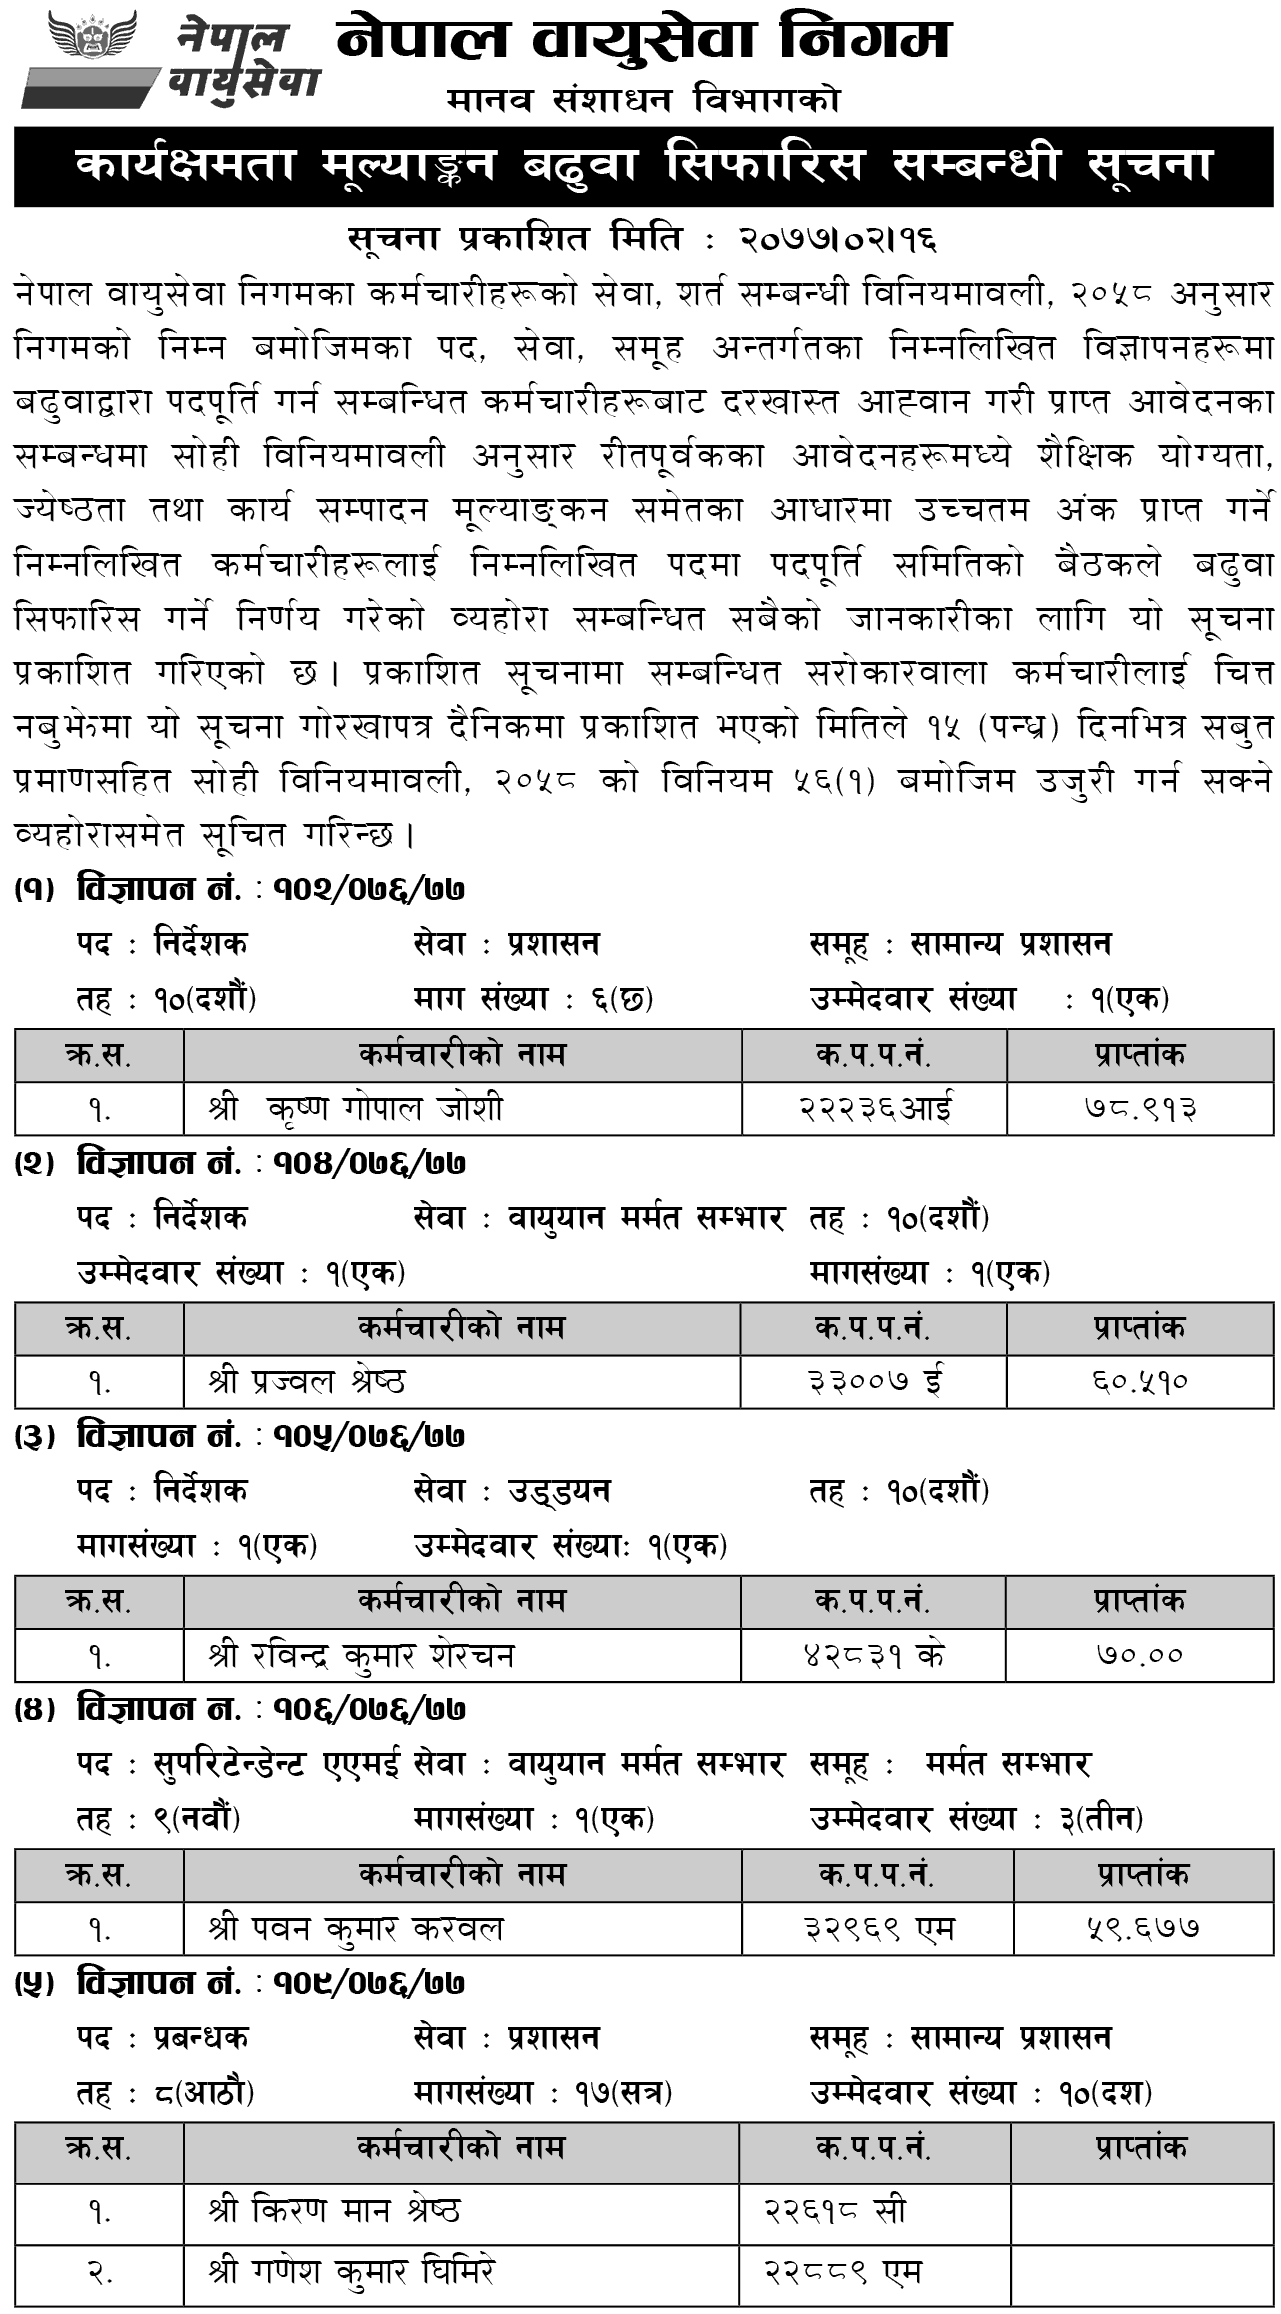 Nepal Airlines Corporation Notice for Employees Promotion